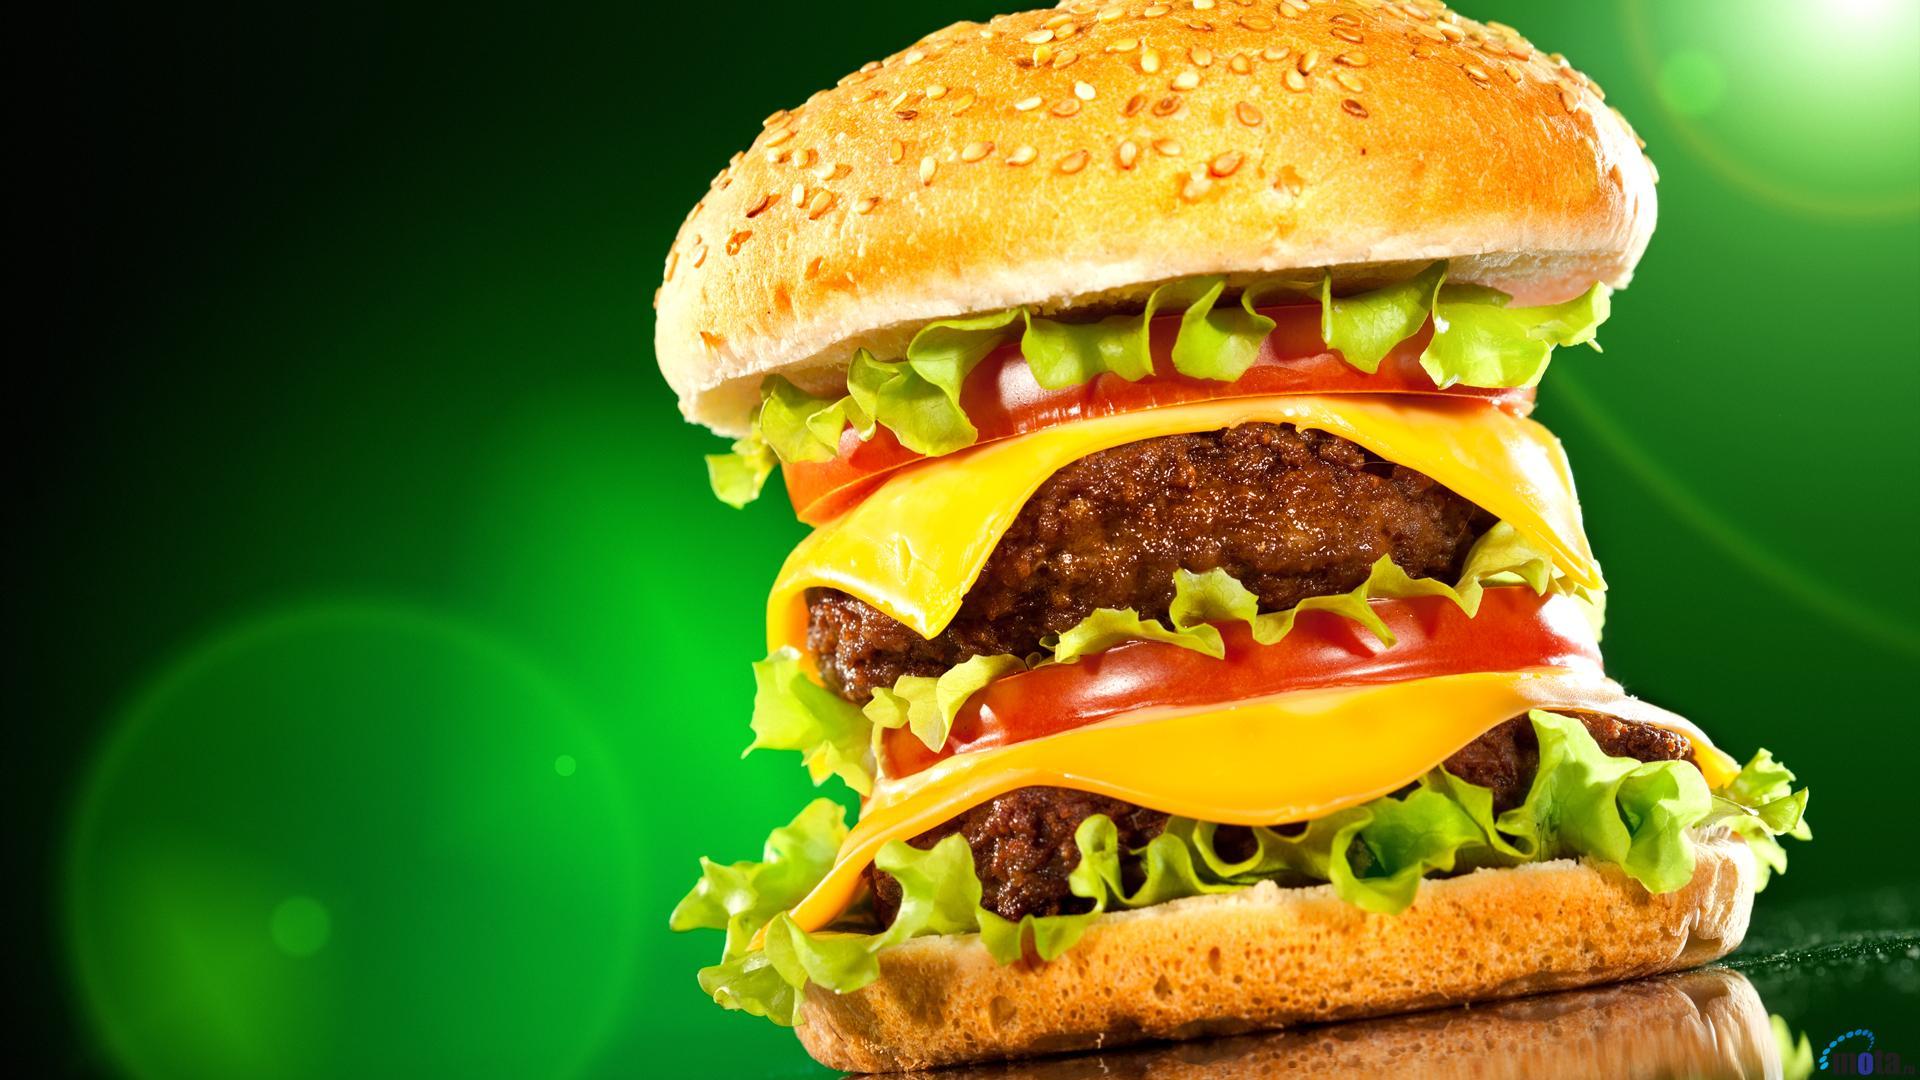 Cool HDQ Cheeseburger Picture (Cool 45 100% Quality HD Wallpaper)